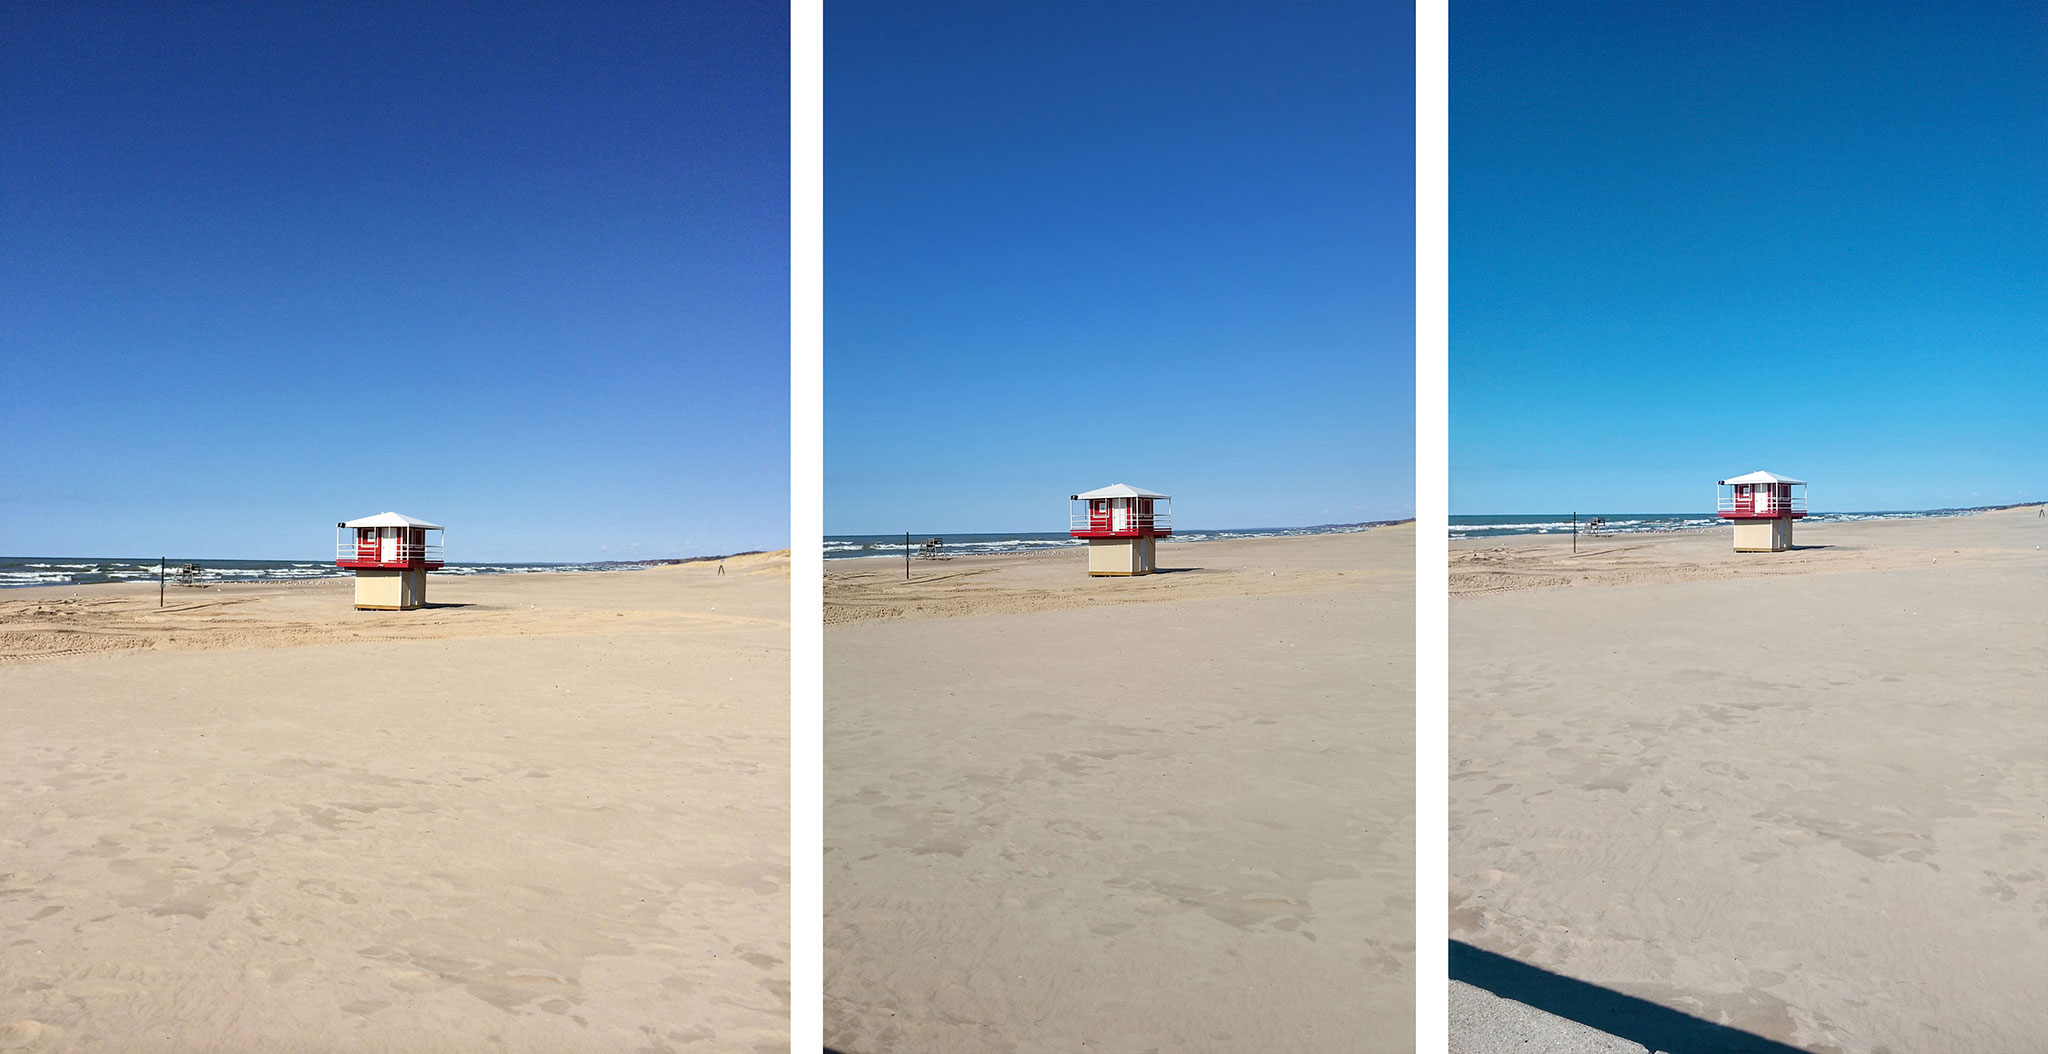 iPhone 5s vs. Galaxy S5 vs. HTC One M8: Everyday and HDR photography